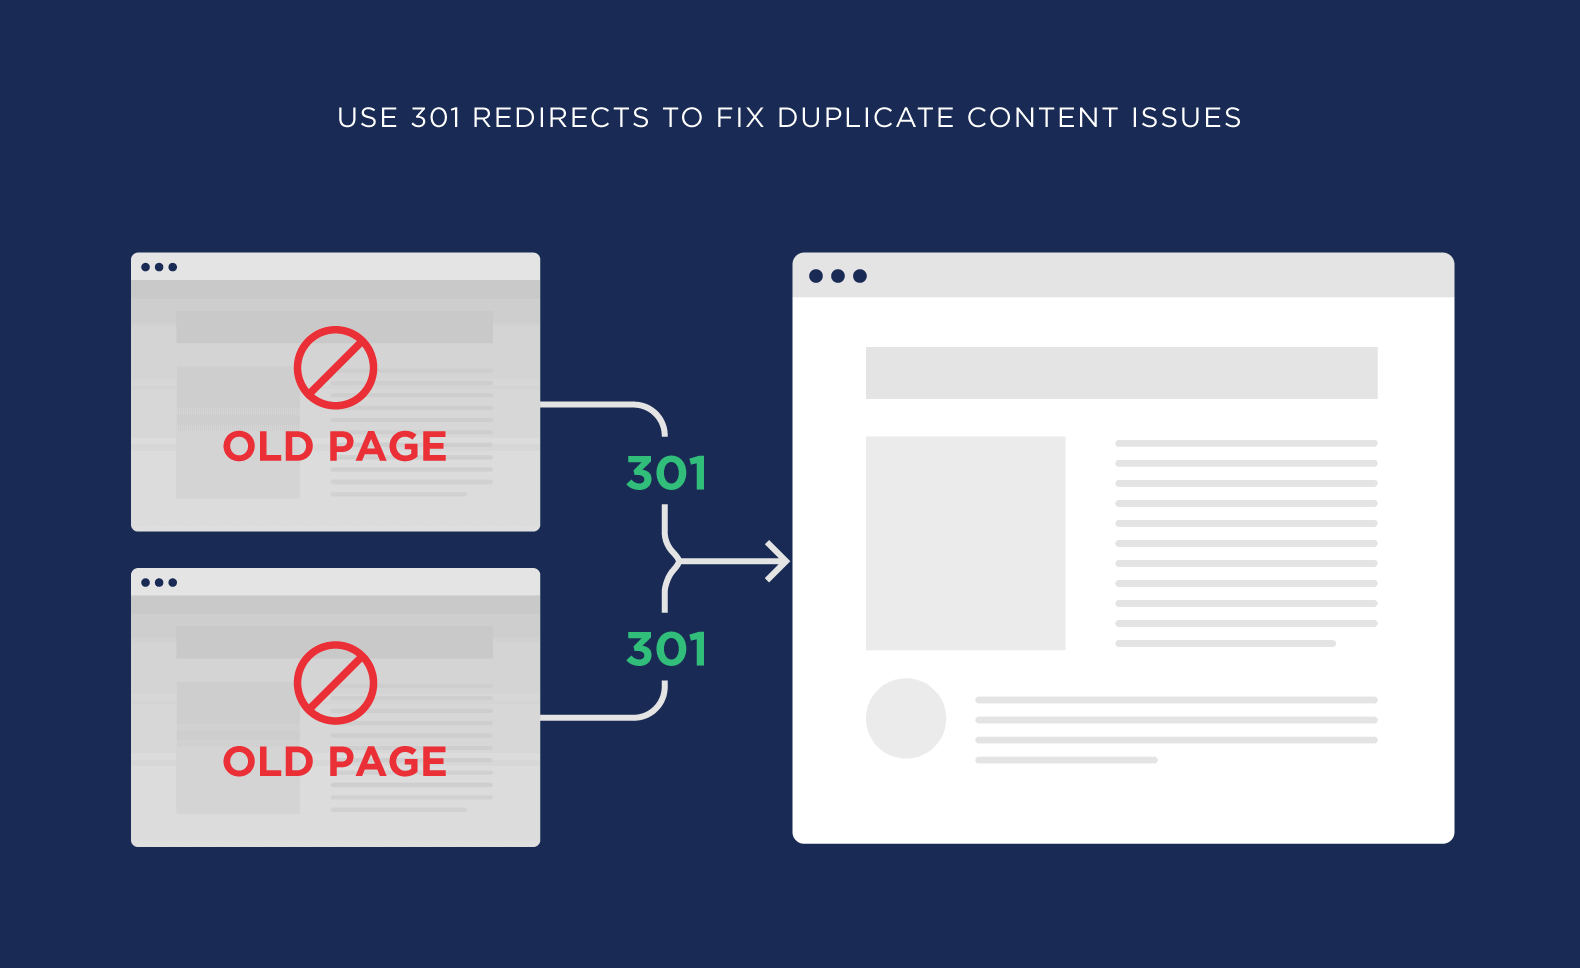 Use 301 redirects to fix duplicate content issues